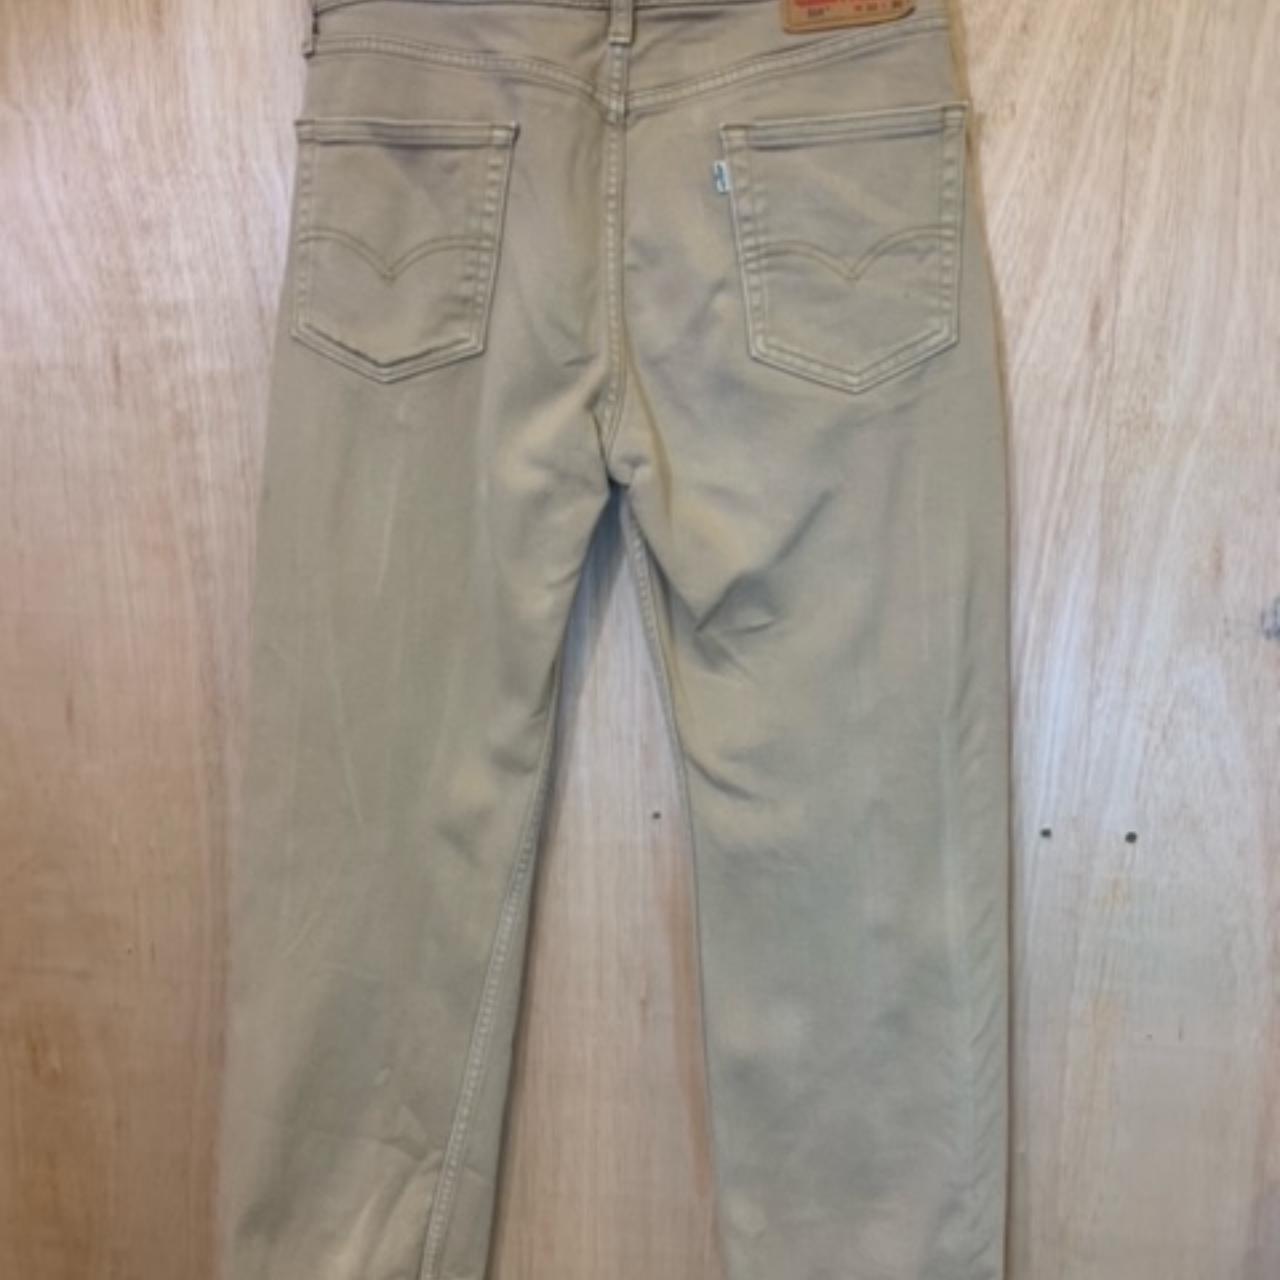 Product Image 3 - Levi's Strauss Co. 514 size